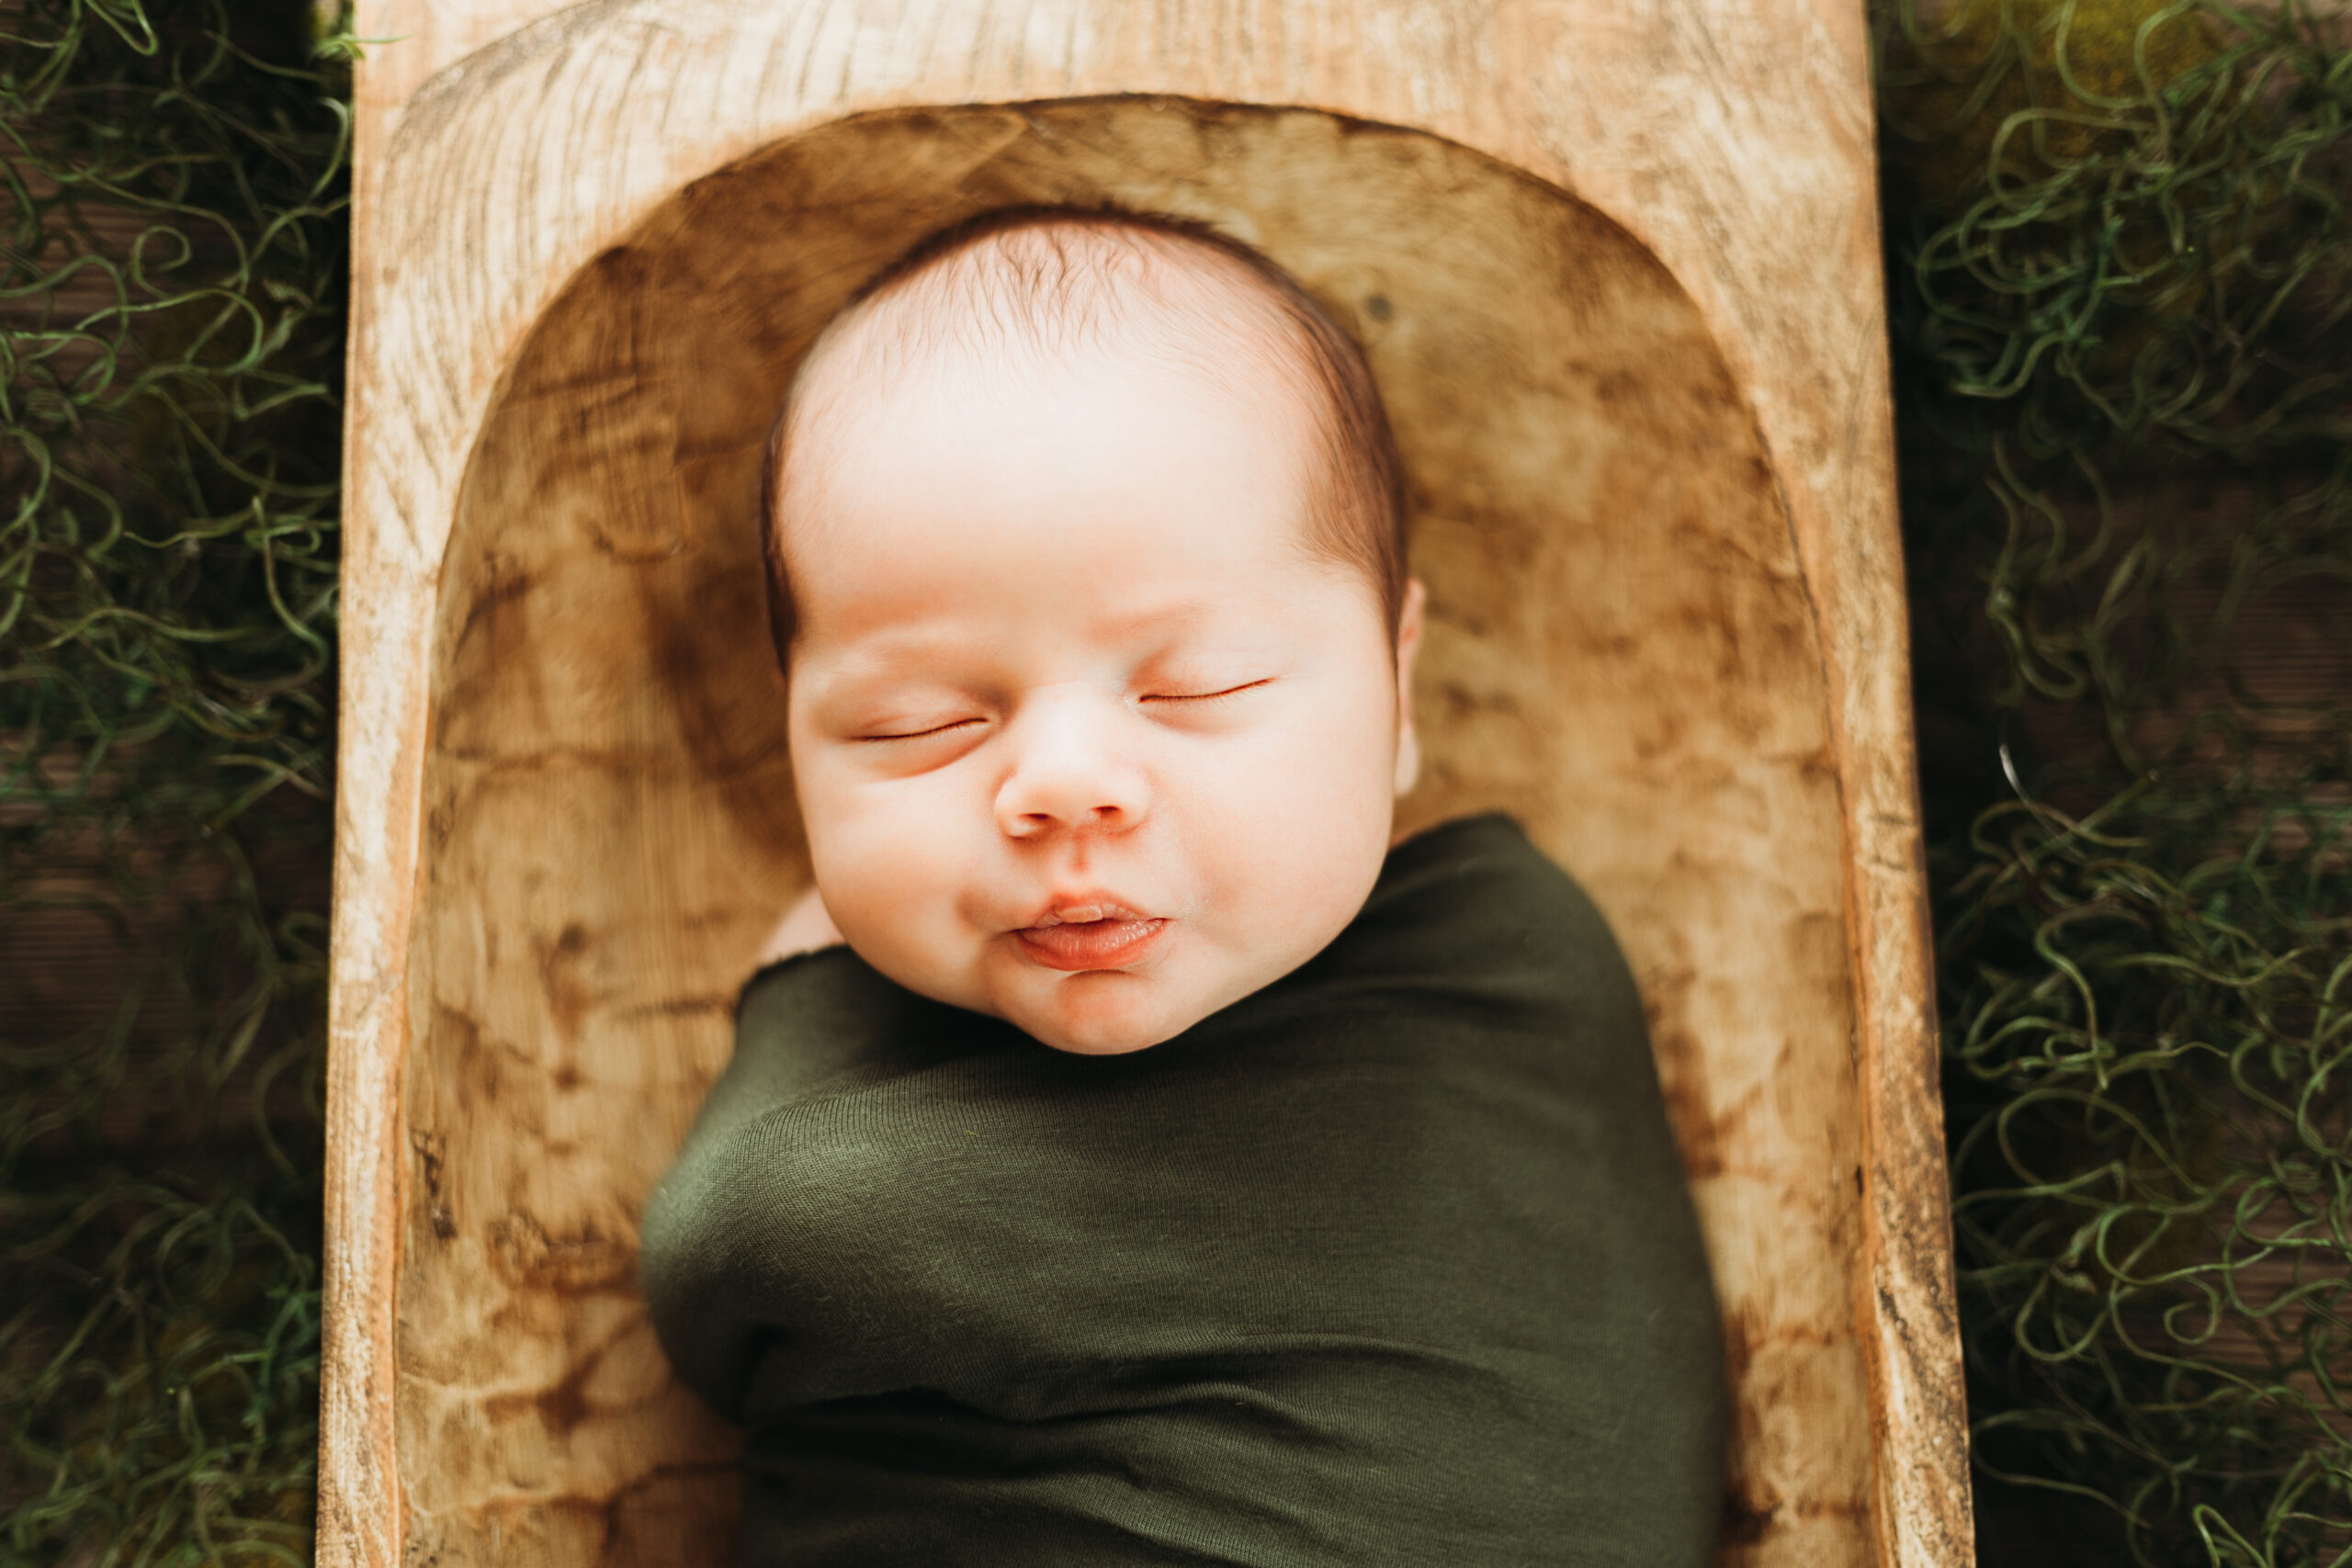 finding a lactation consultant in Houston yields a lot of choices, but Leah Jolly is the go to for this newborn sleeping in a dough bowl with olive green accents.